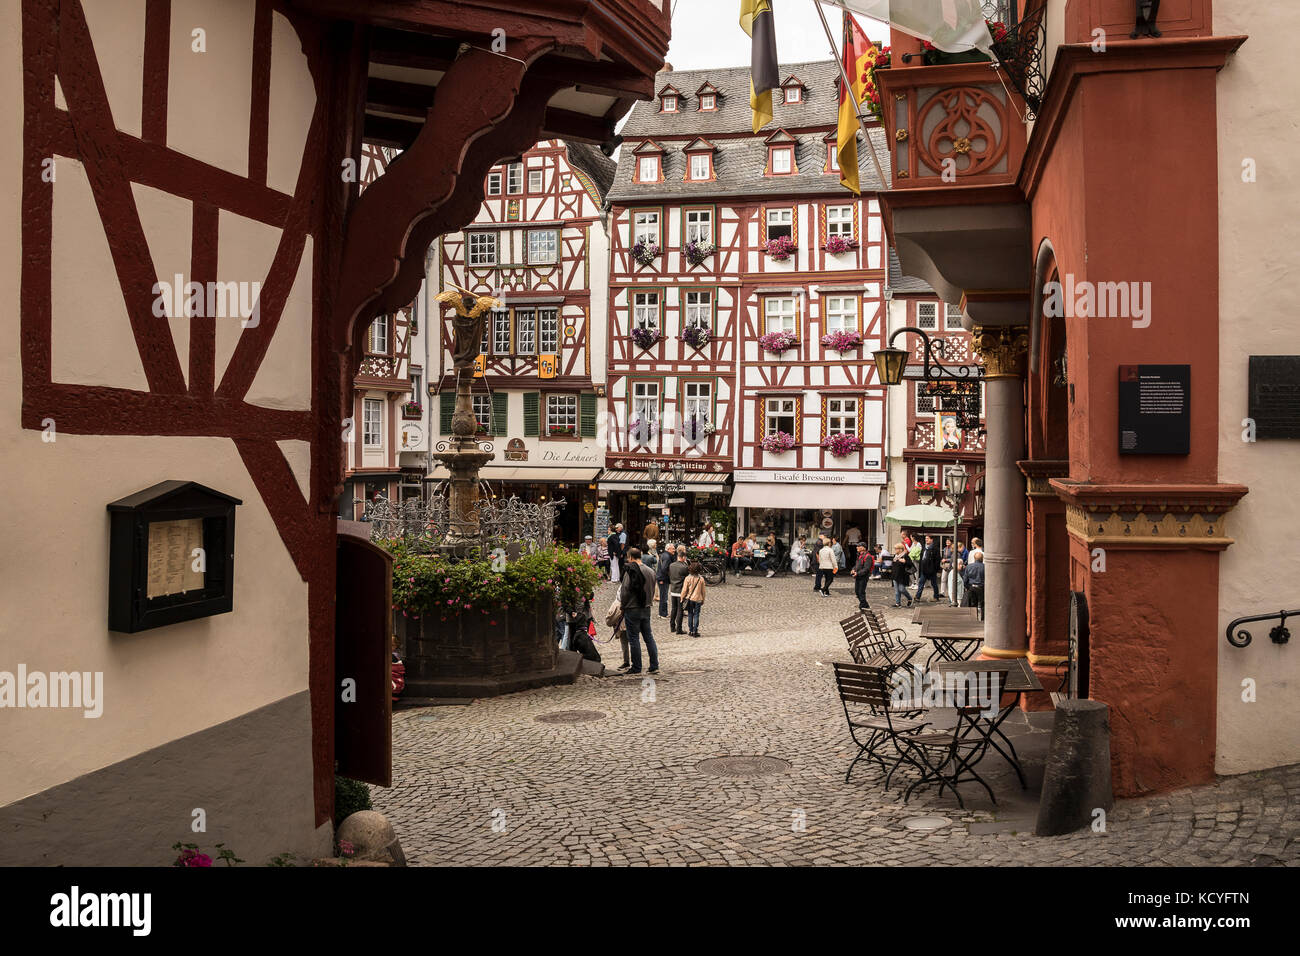 The town of Bernkastel-Kues, in the Mosel Valley, Germany Stock Photo